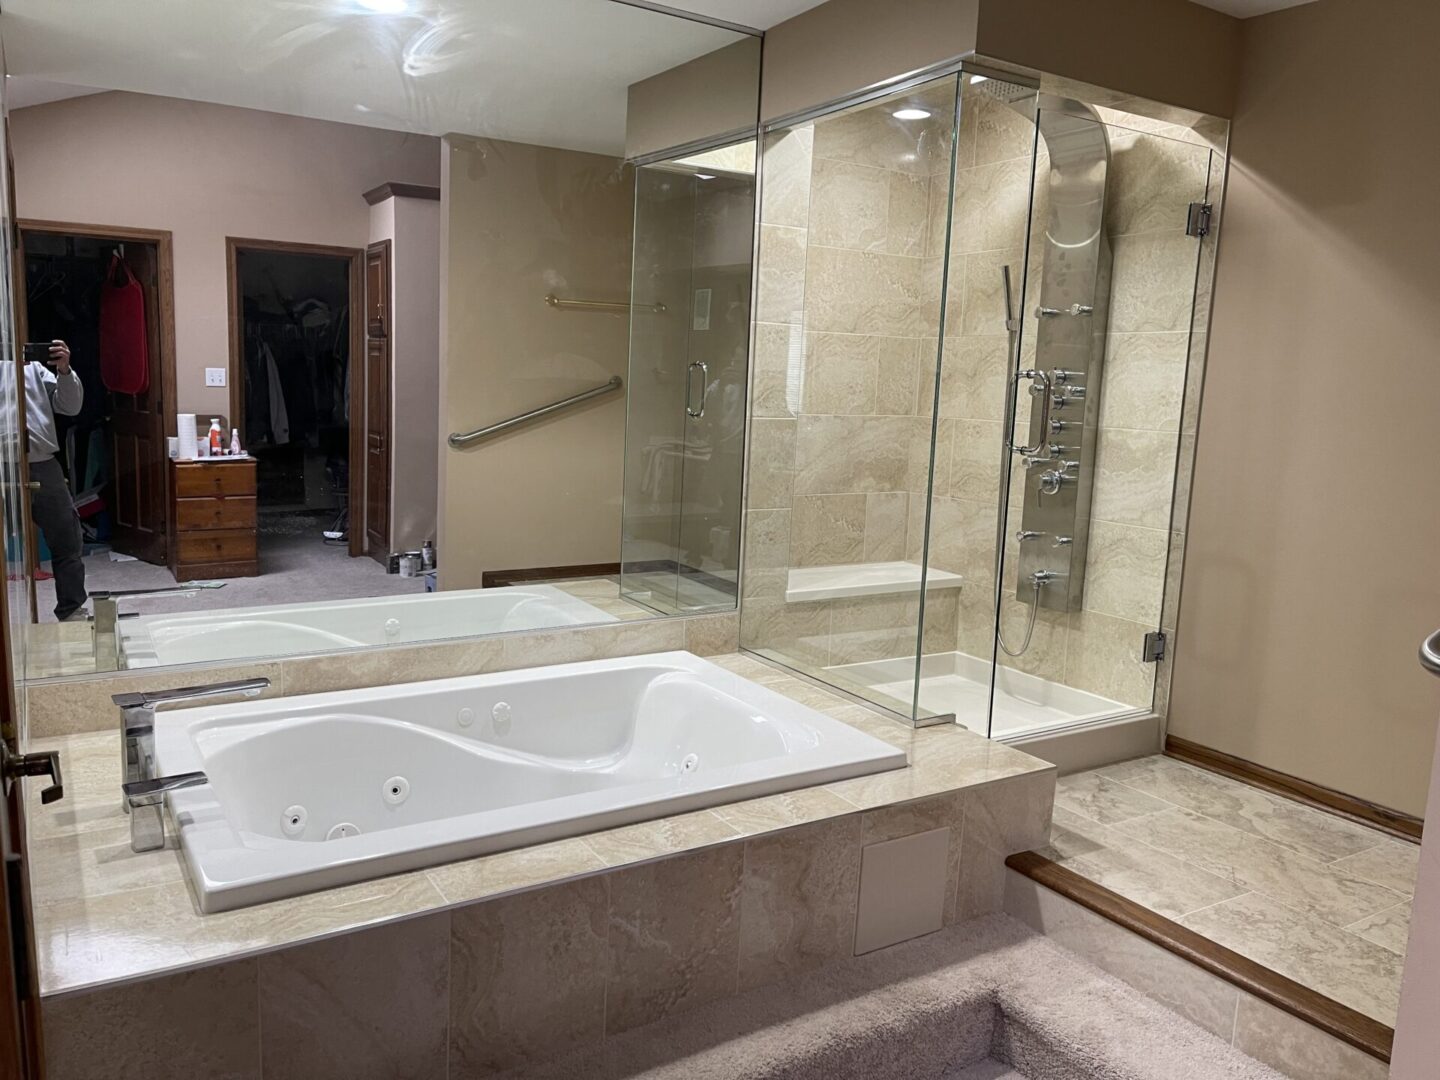 A bathroom with a glass shower enclosure and a jacuzzi tub.